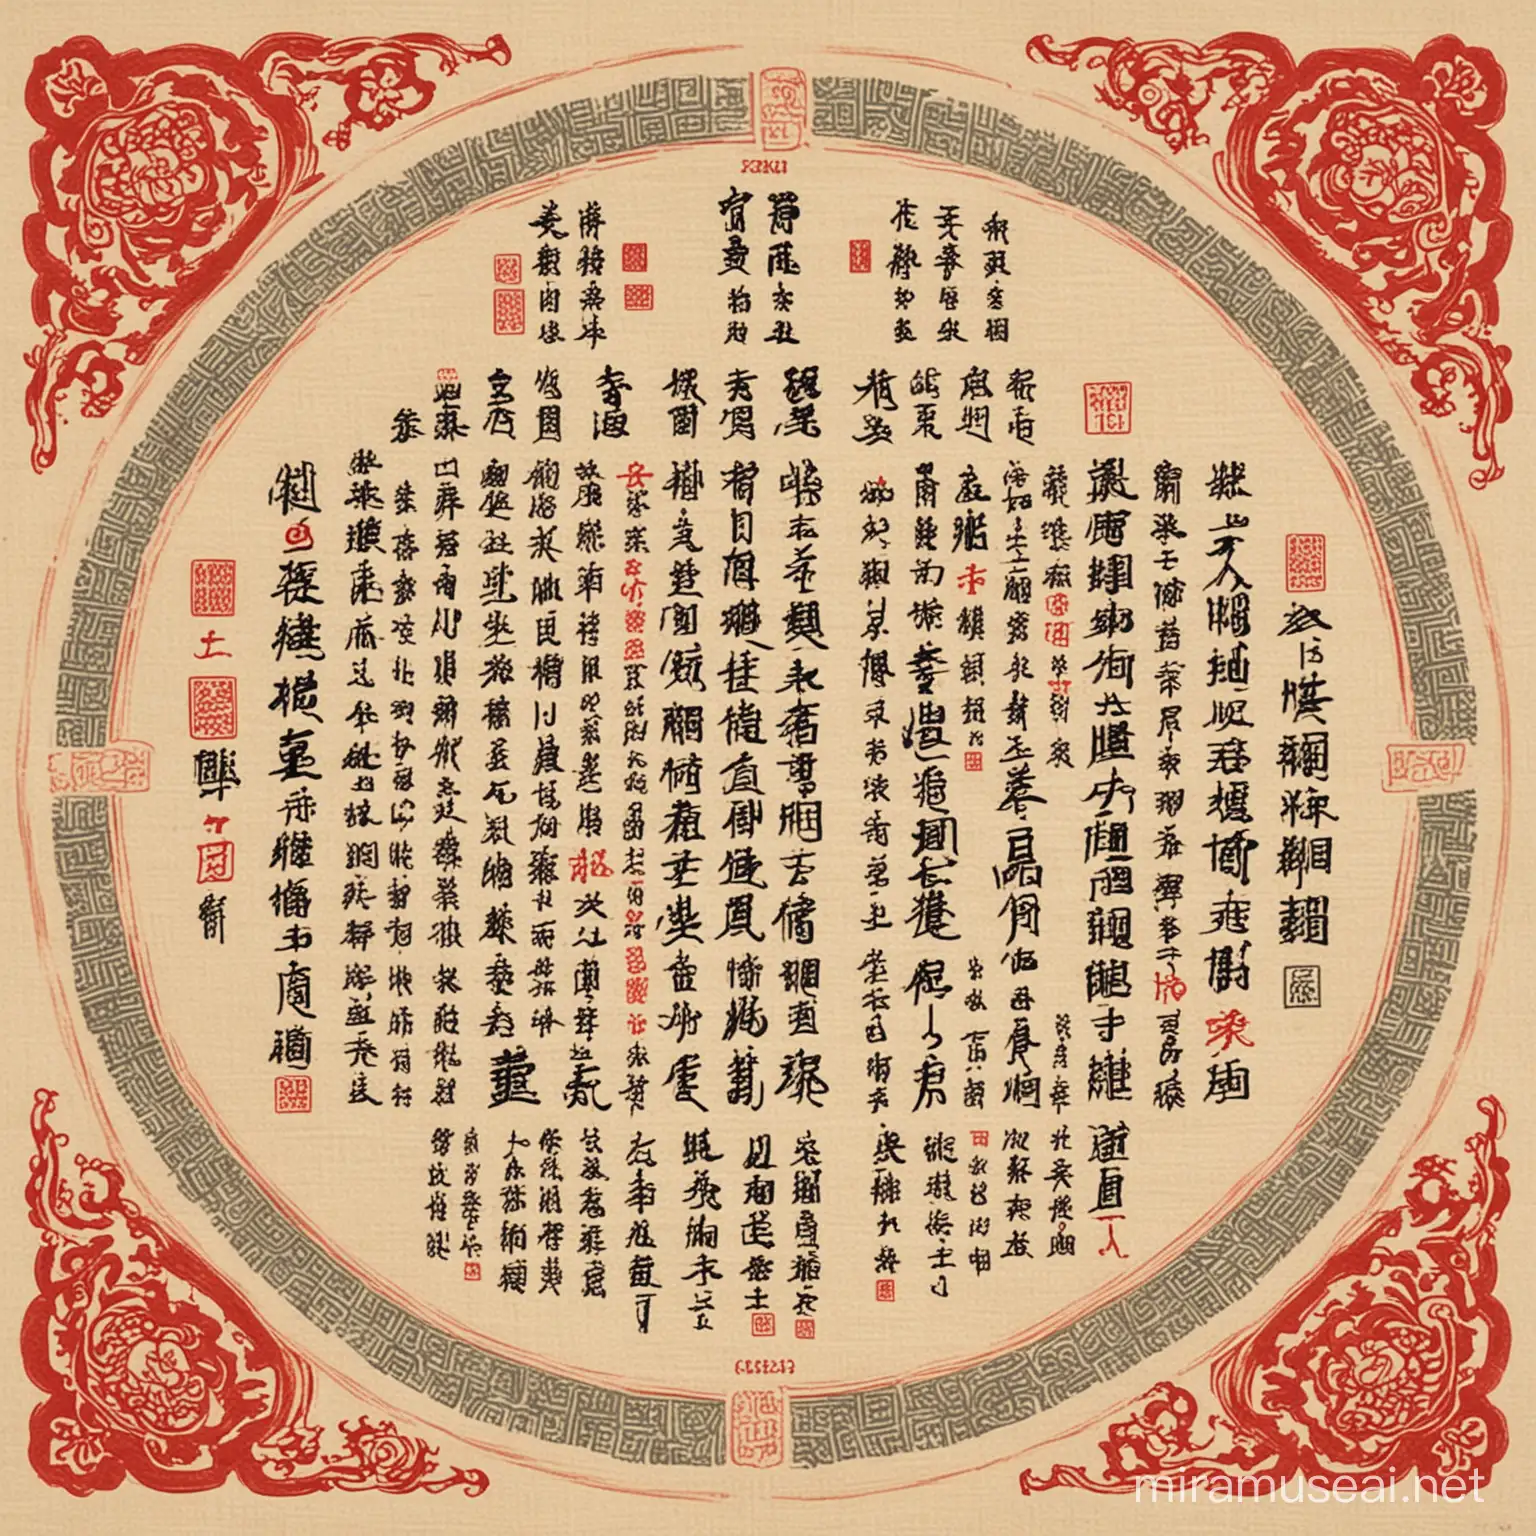 Chinese Scripture Themed Placemats for Cultural Dining Experience